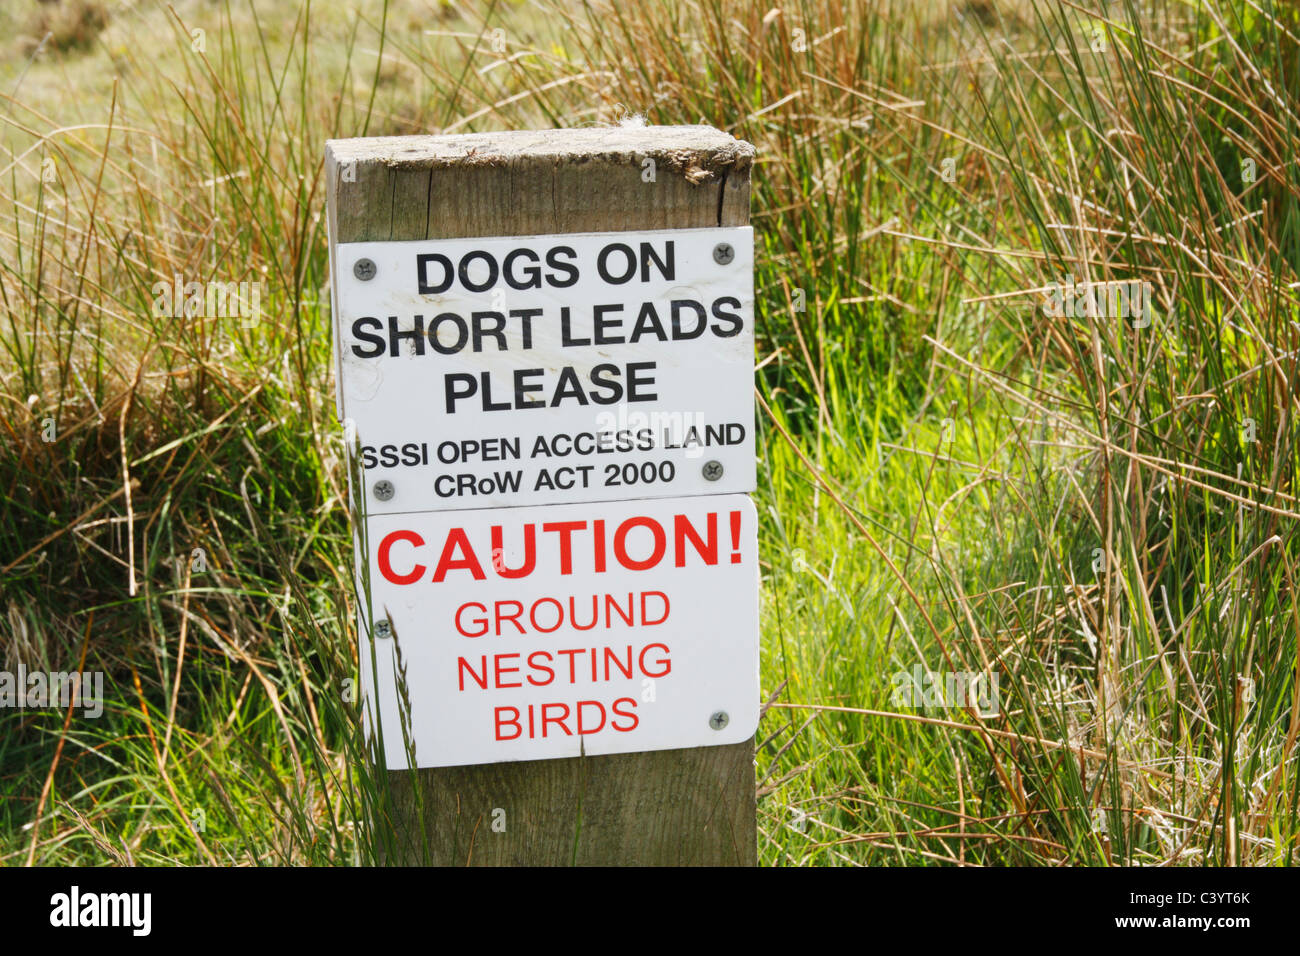 Sign on North Yorkshire moors advising dog owners to keep dog on short leads to protect ground nesting birds Stock Photo